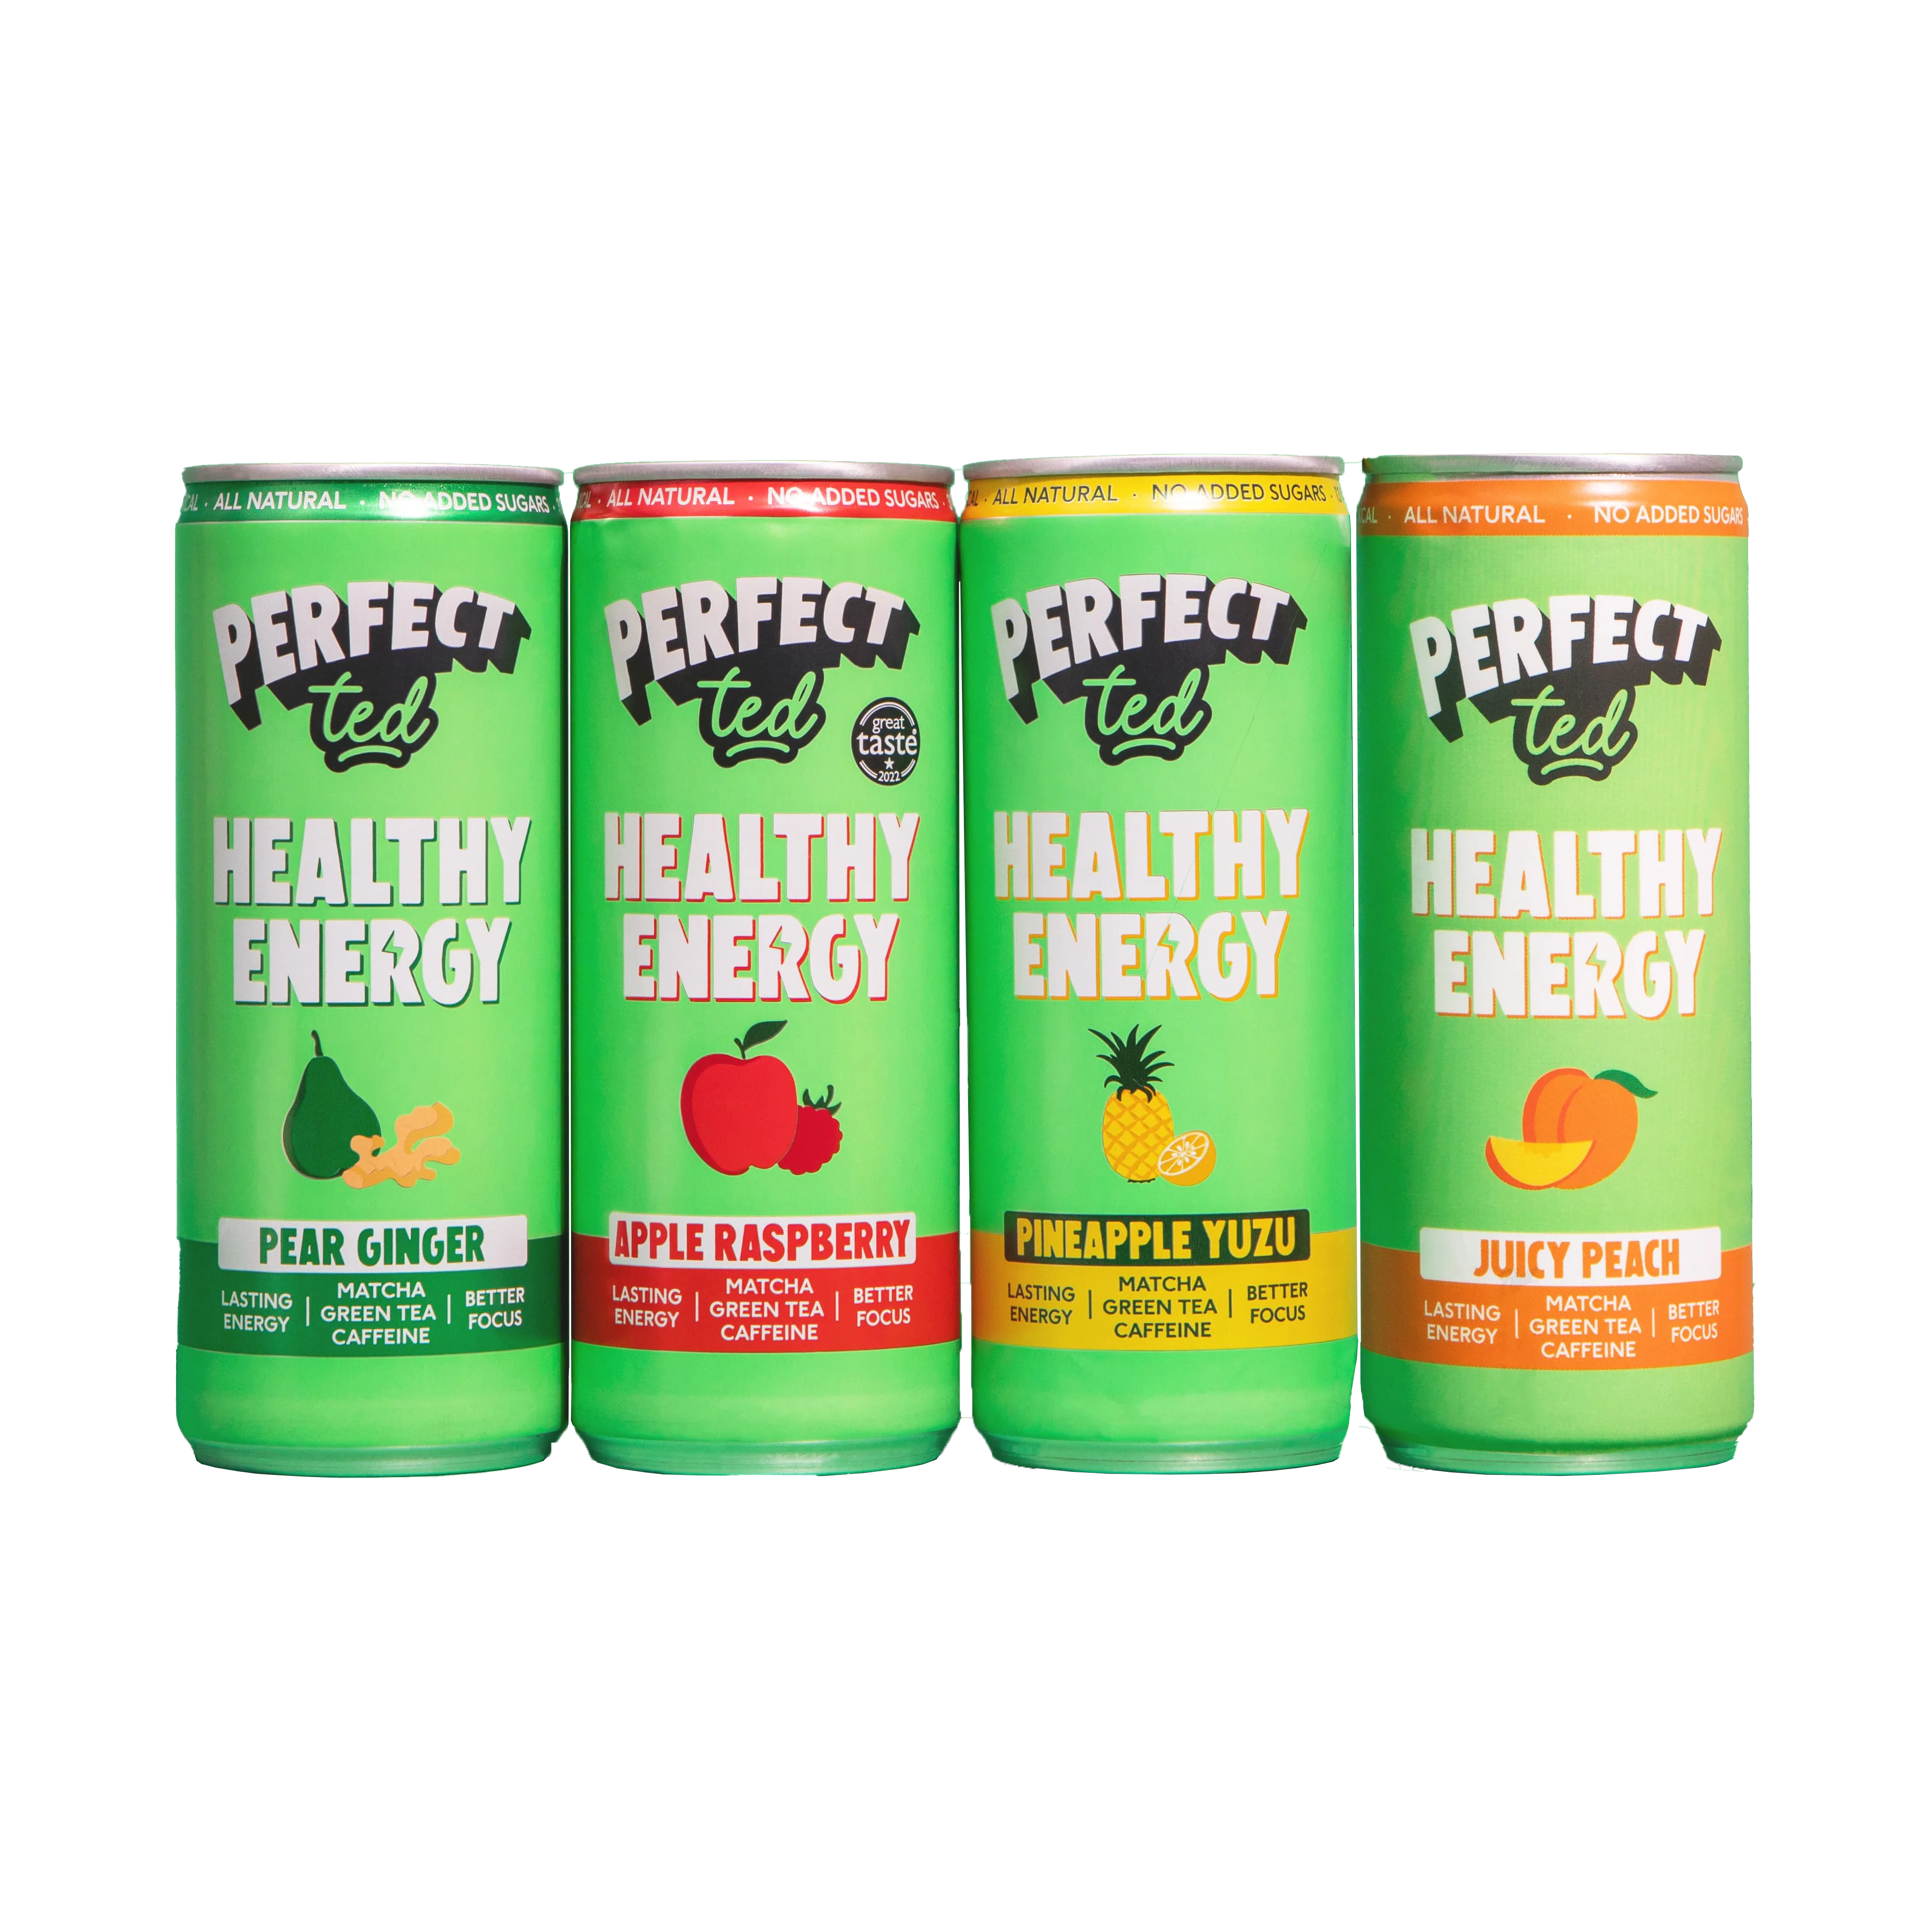 PerfectTed Helahty Energy Drink Flavours lined up